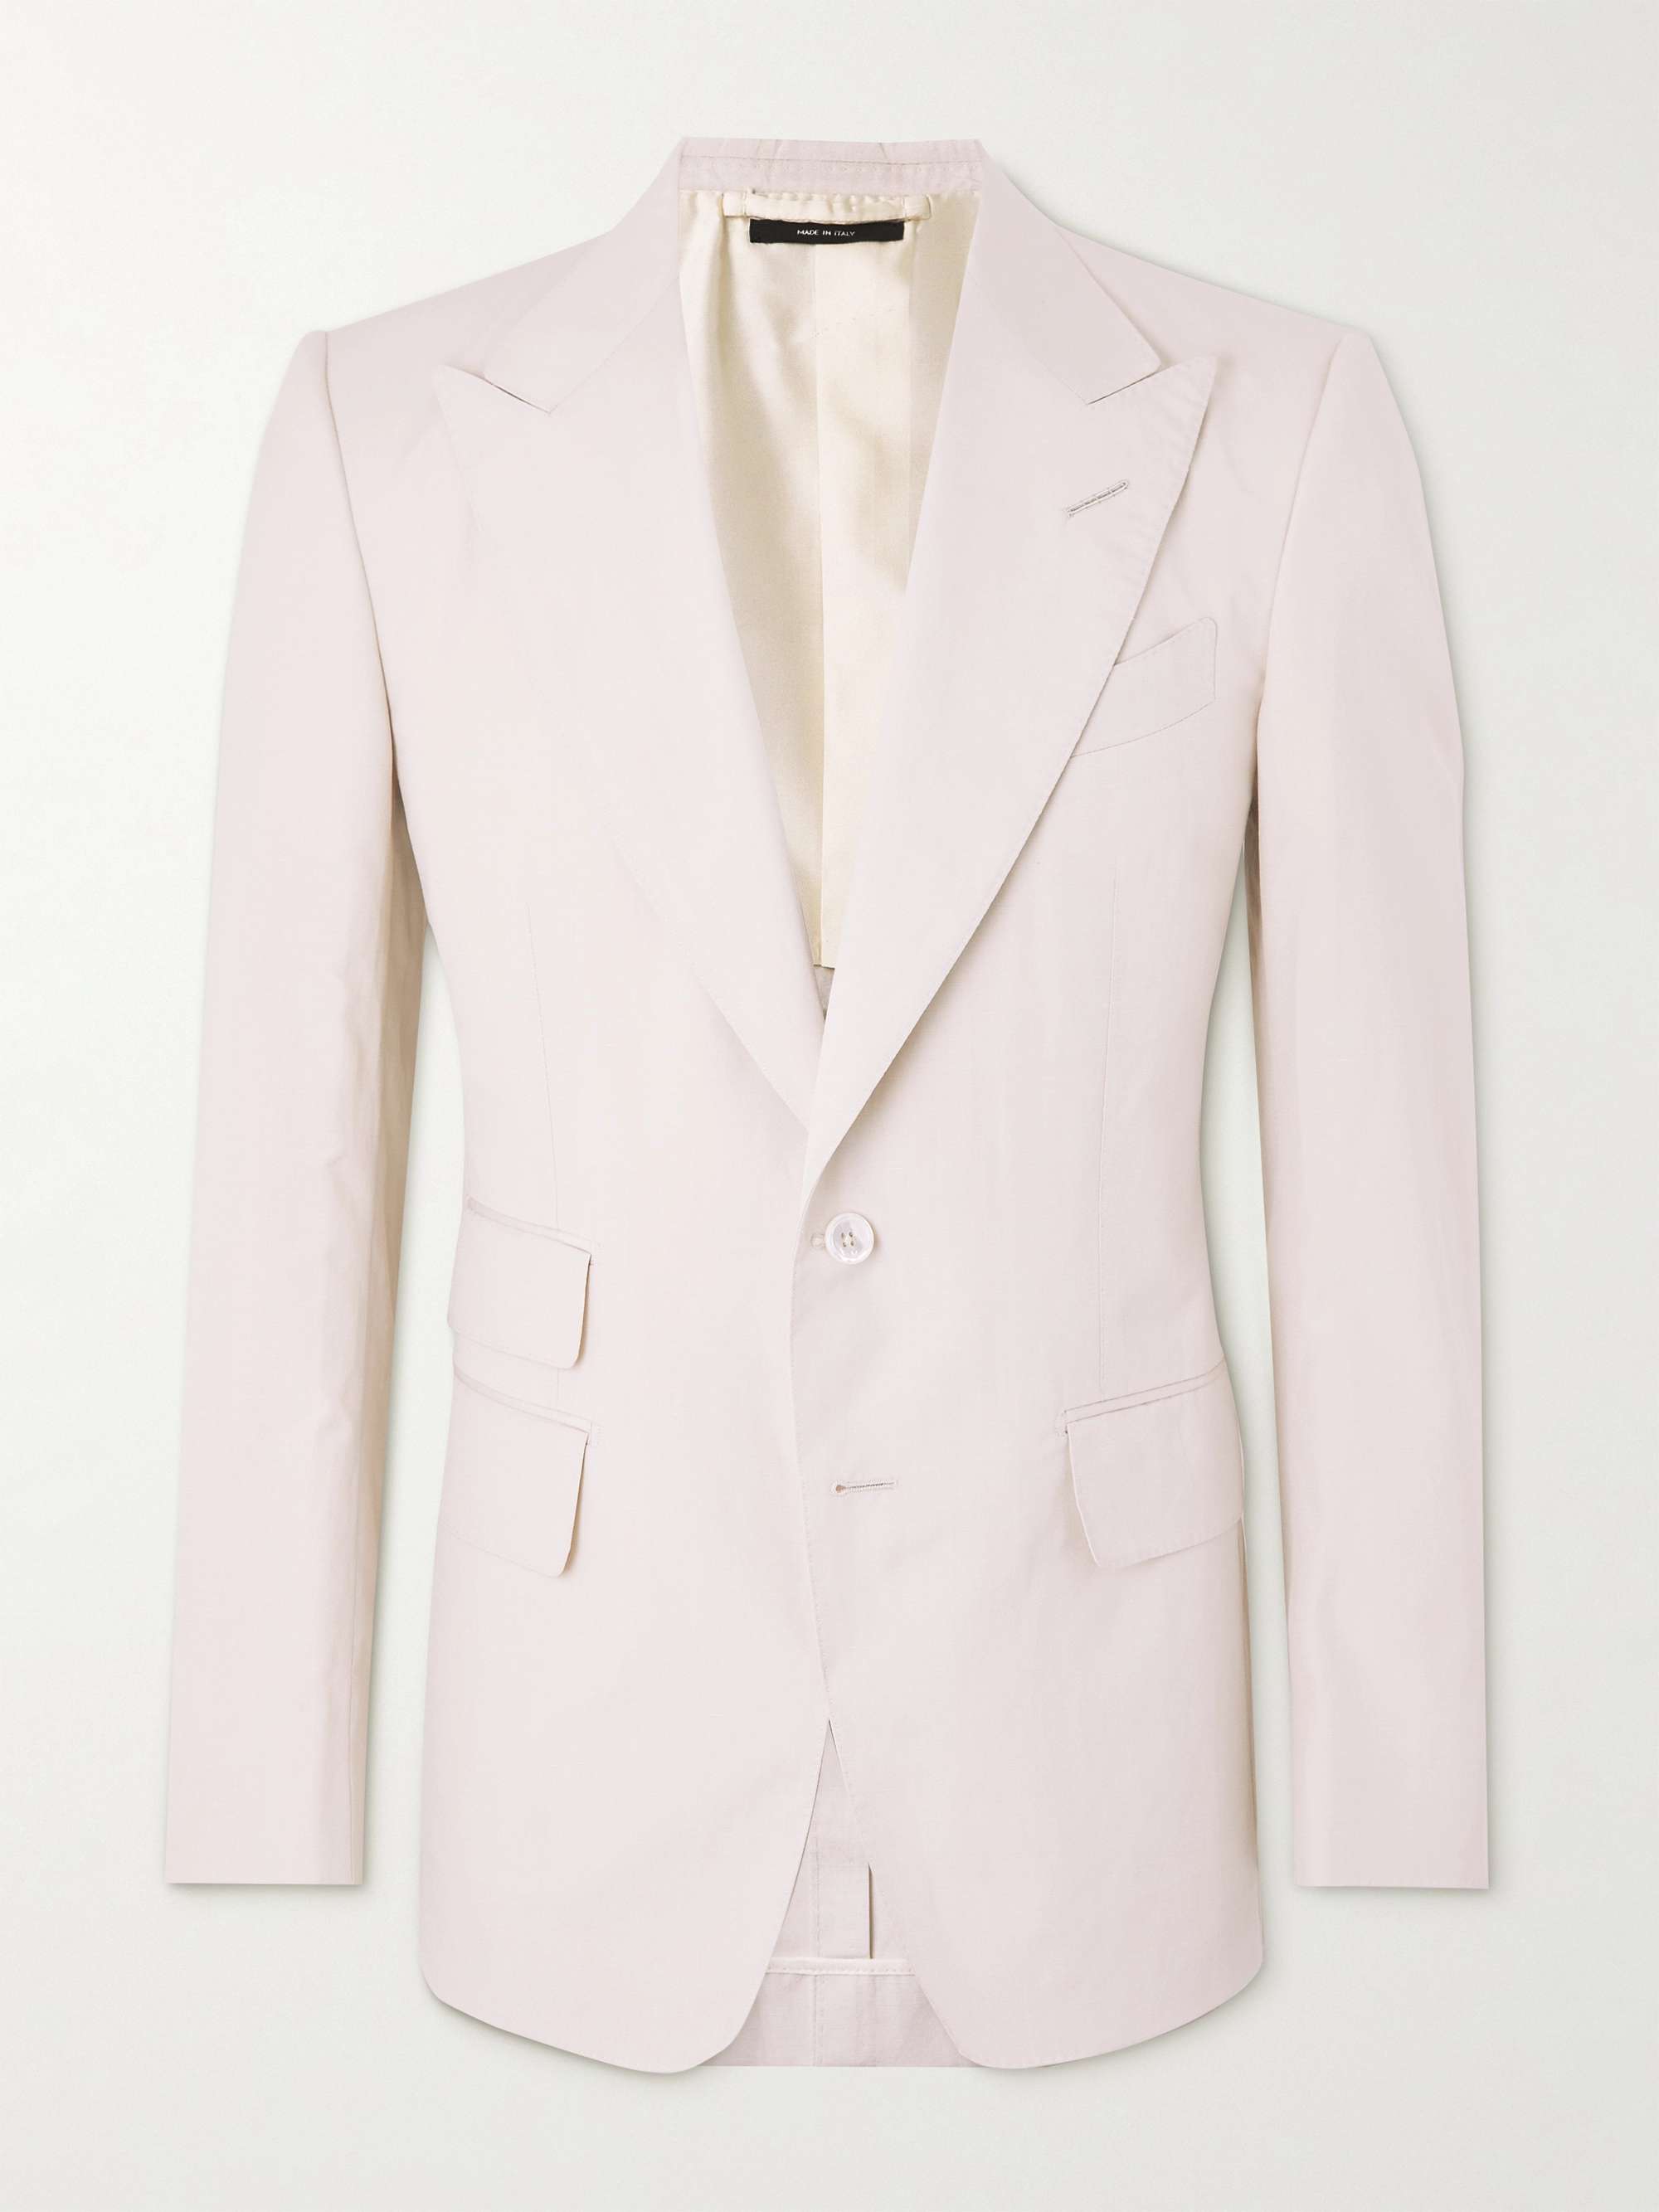 TOM FORD Silk, Linen and Wool-Blend Suit Jacket